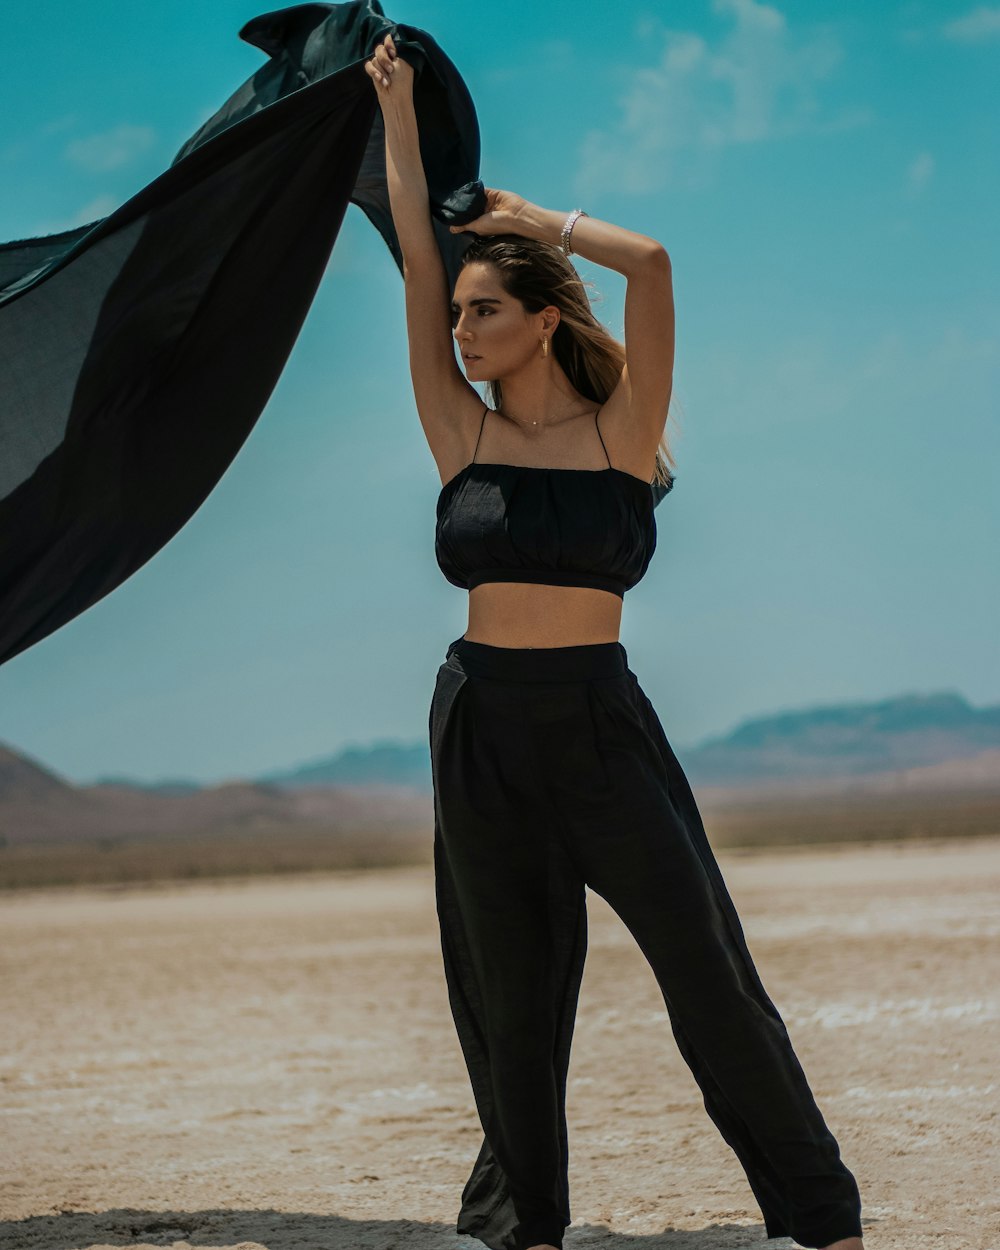 woman in black brassiere and black pants holding black textile on beach during daytime